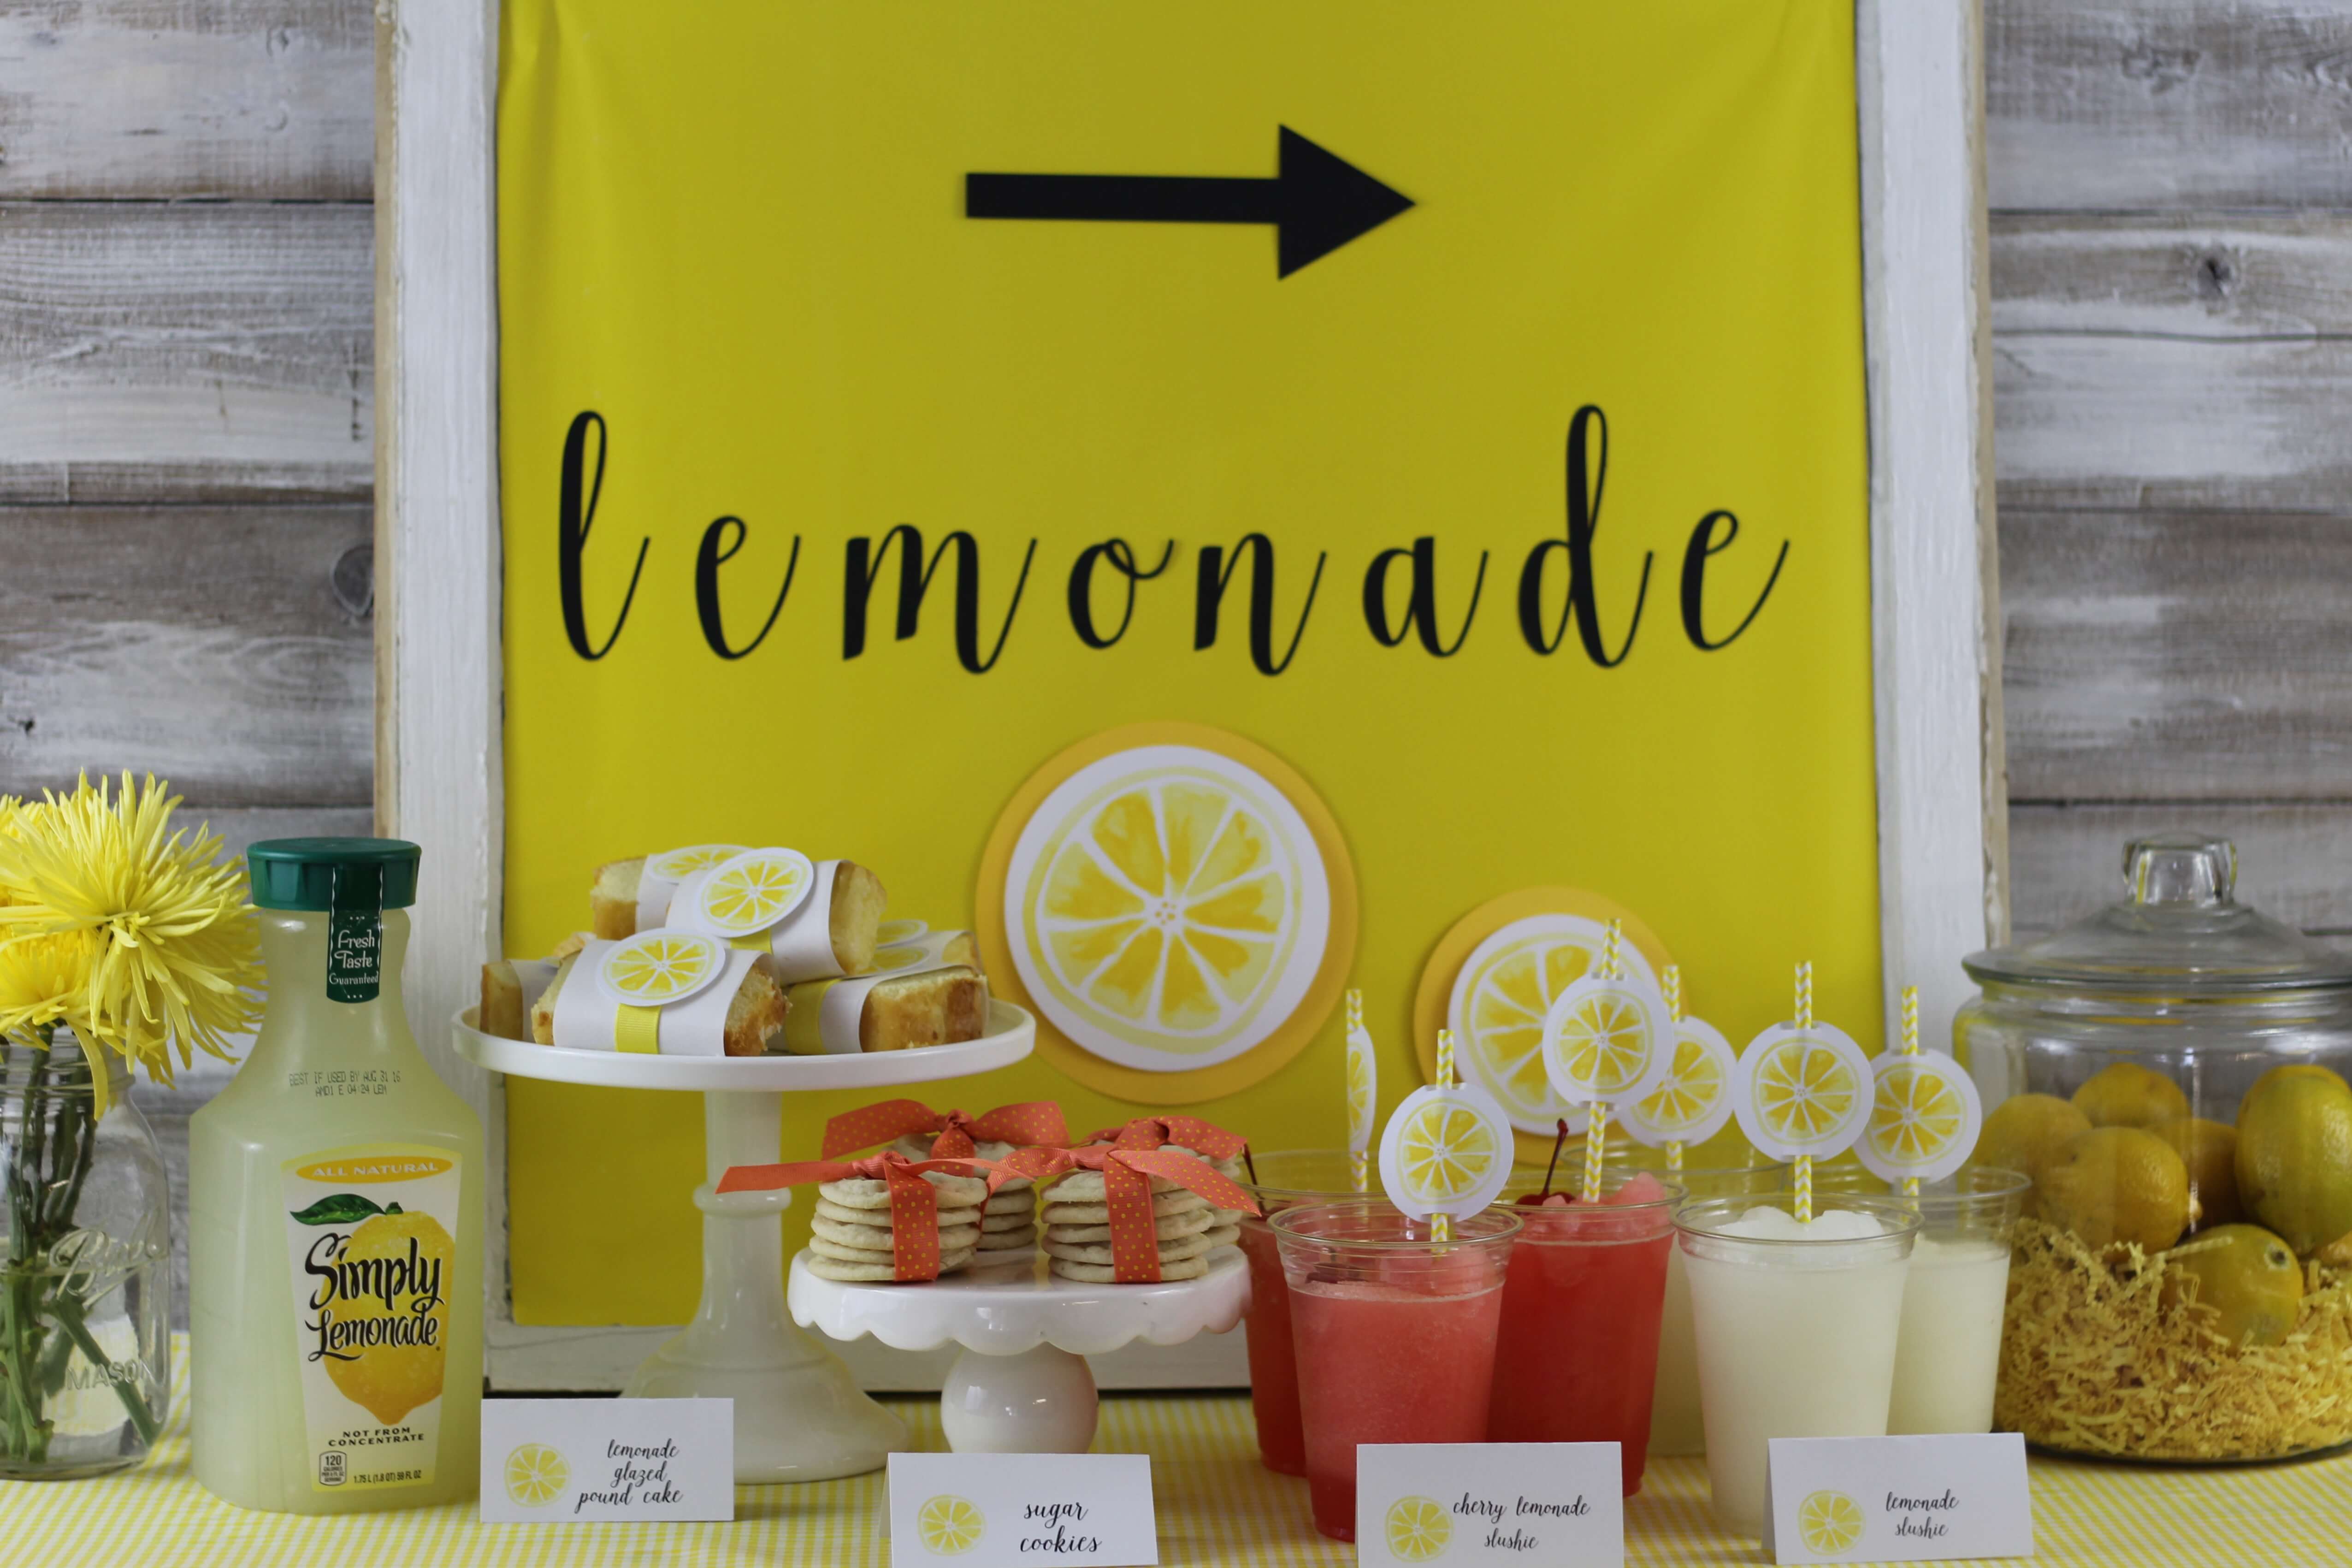 Everyday Party Magazine Lemonade Stand Party